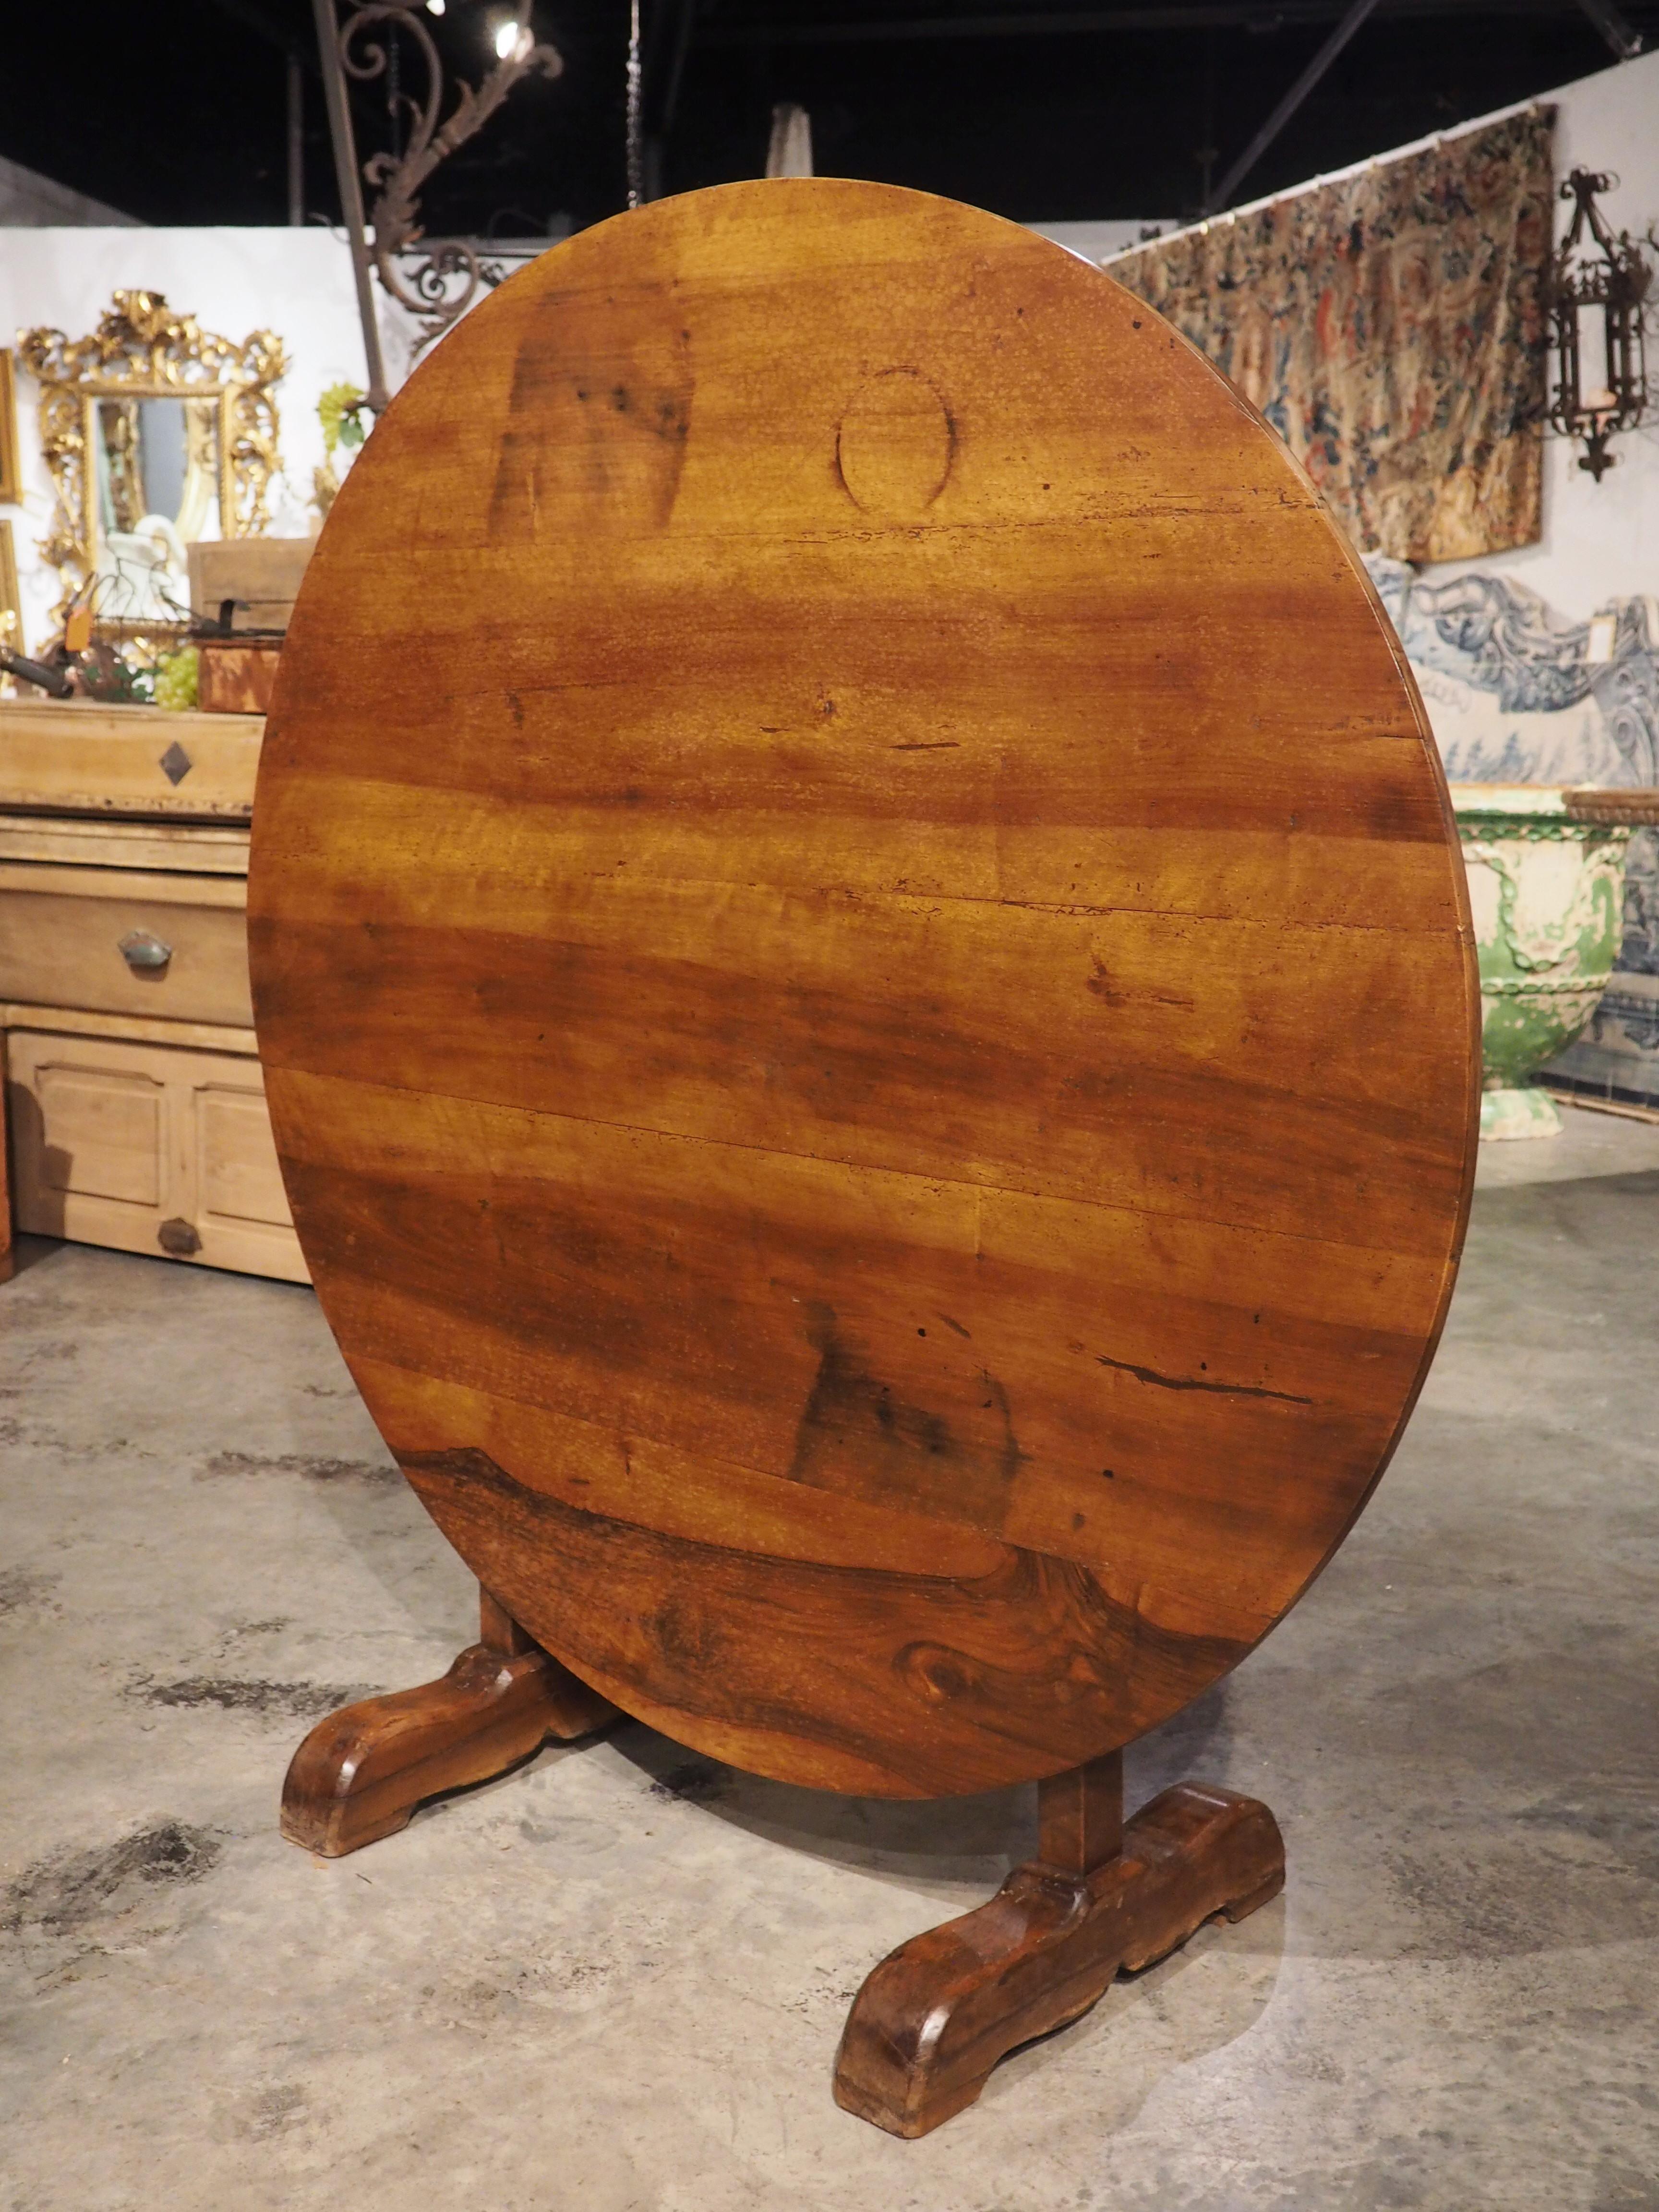 Hand-carved in walnut wood in France, circa 1880, this tilt-top table is known as a wine tasting or vintner’s table. The table features a striated top of brown and honey colored wood with some unique grains. Ideal for when space is at a premium, the